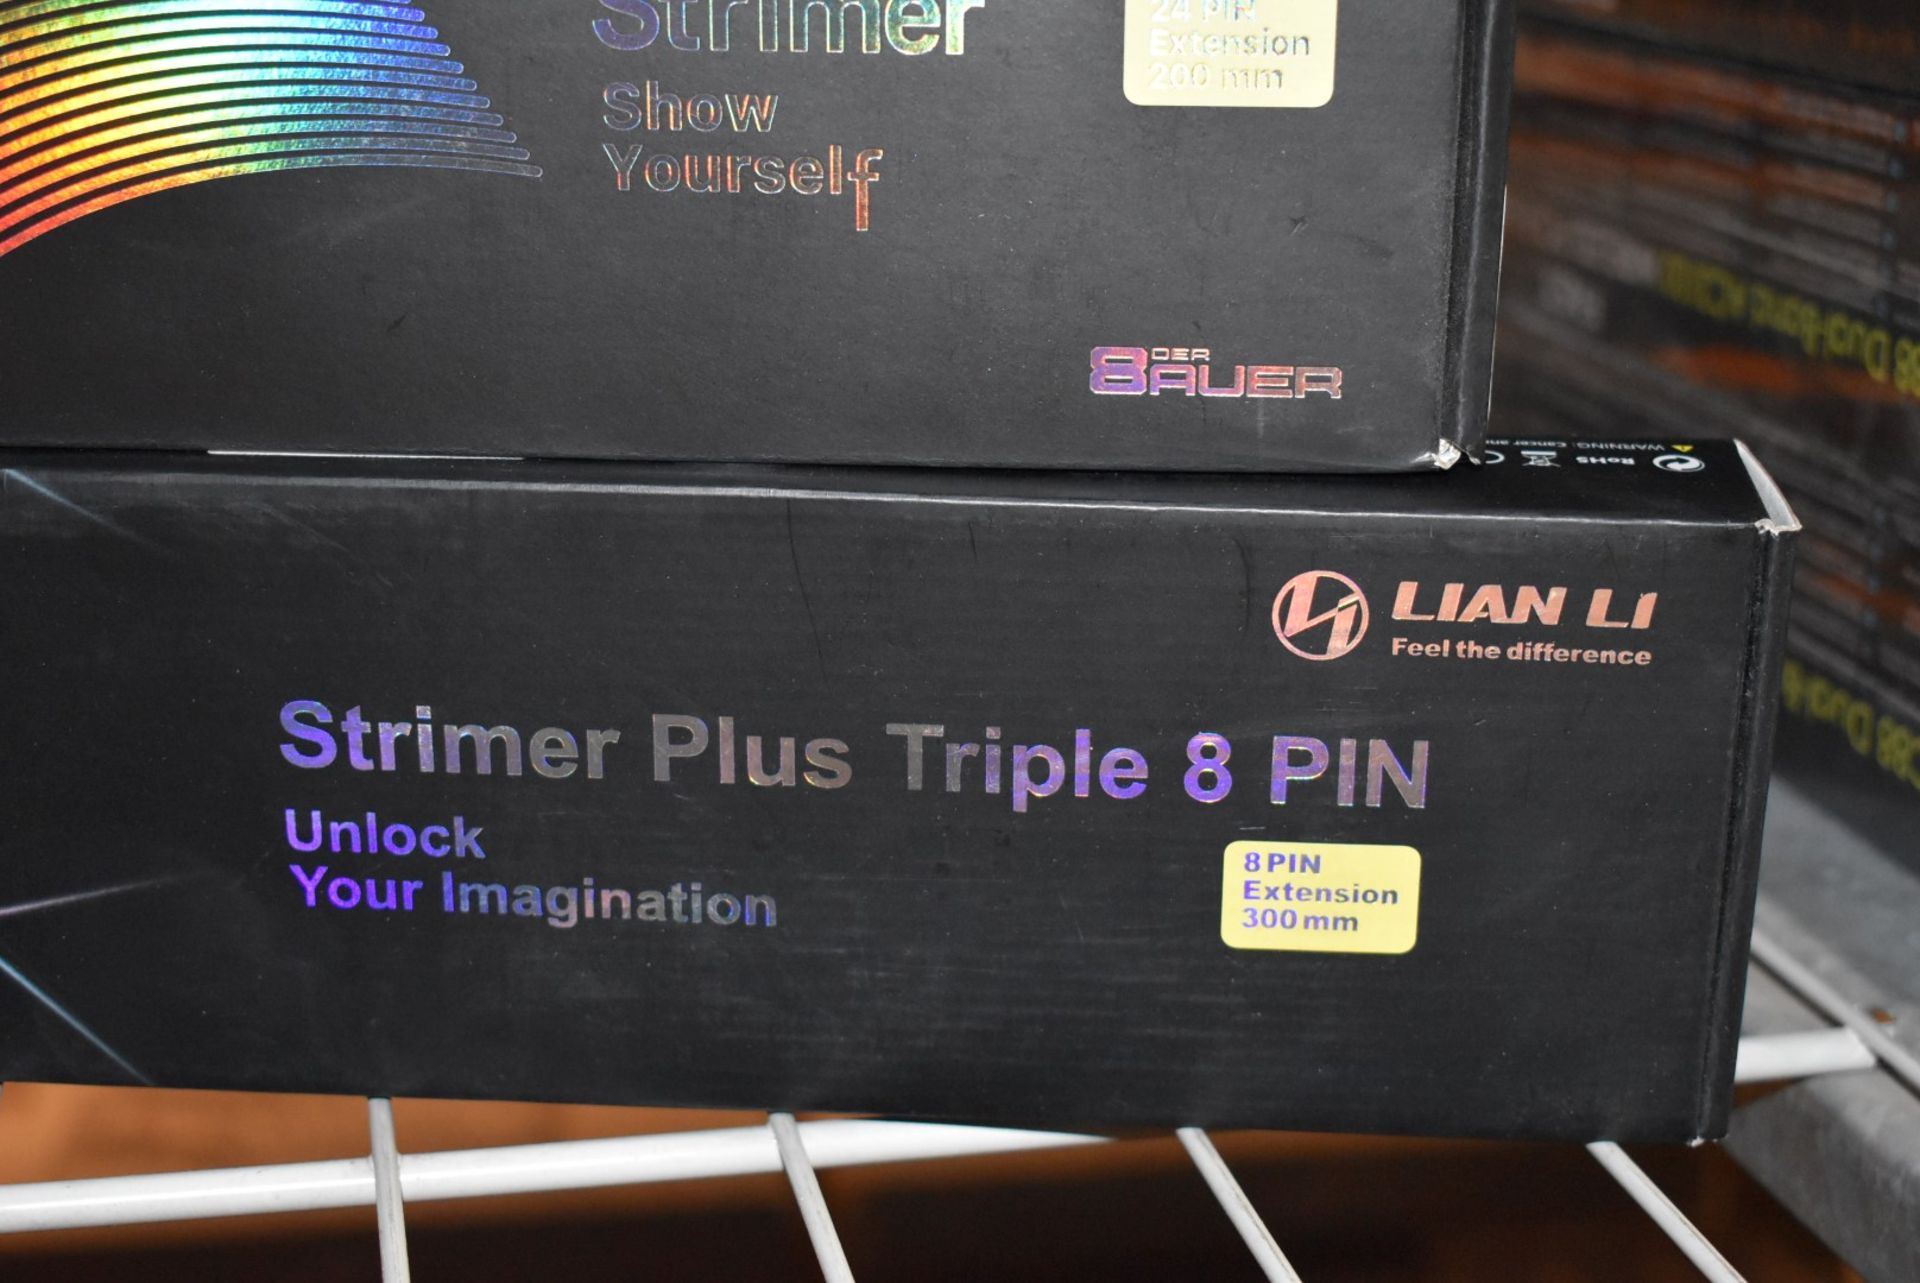 2 x Lian Li RGB LED Strimer Extension Cable Kits - Includes 1 x 8 Pin Graphics Card Cable - Image 3 of 5